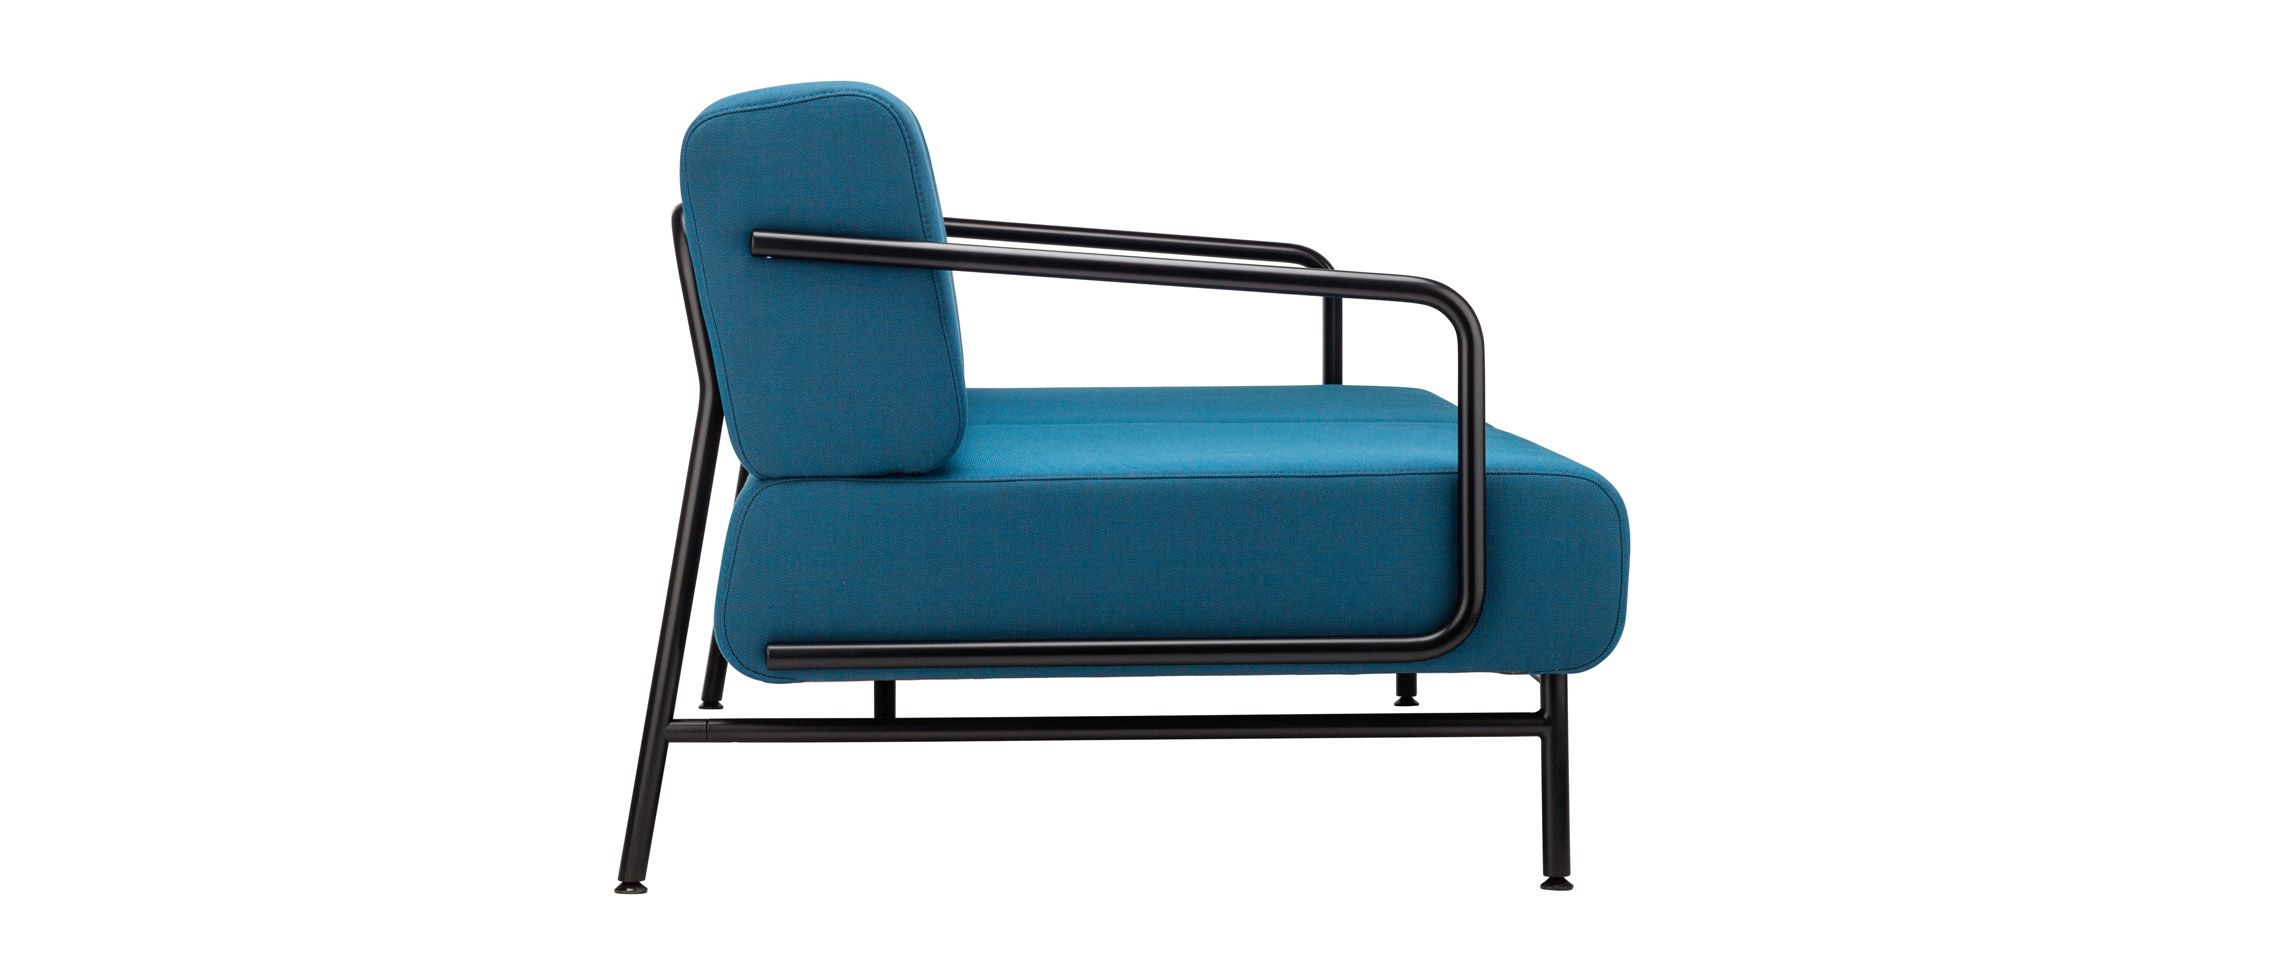 S 651Collection by Sabine Hutter for Thonet